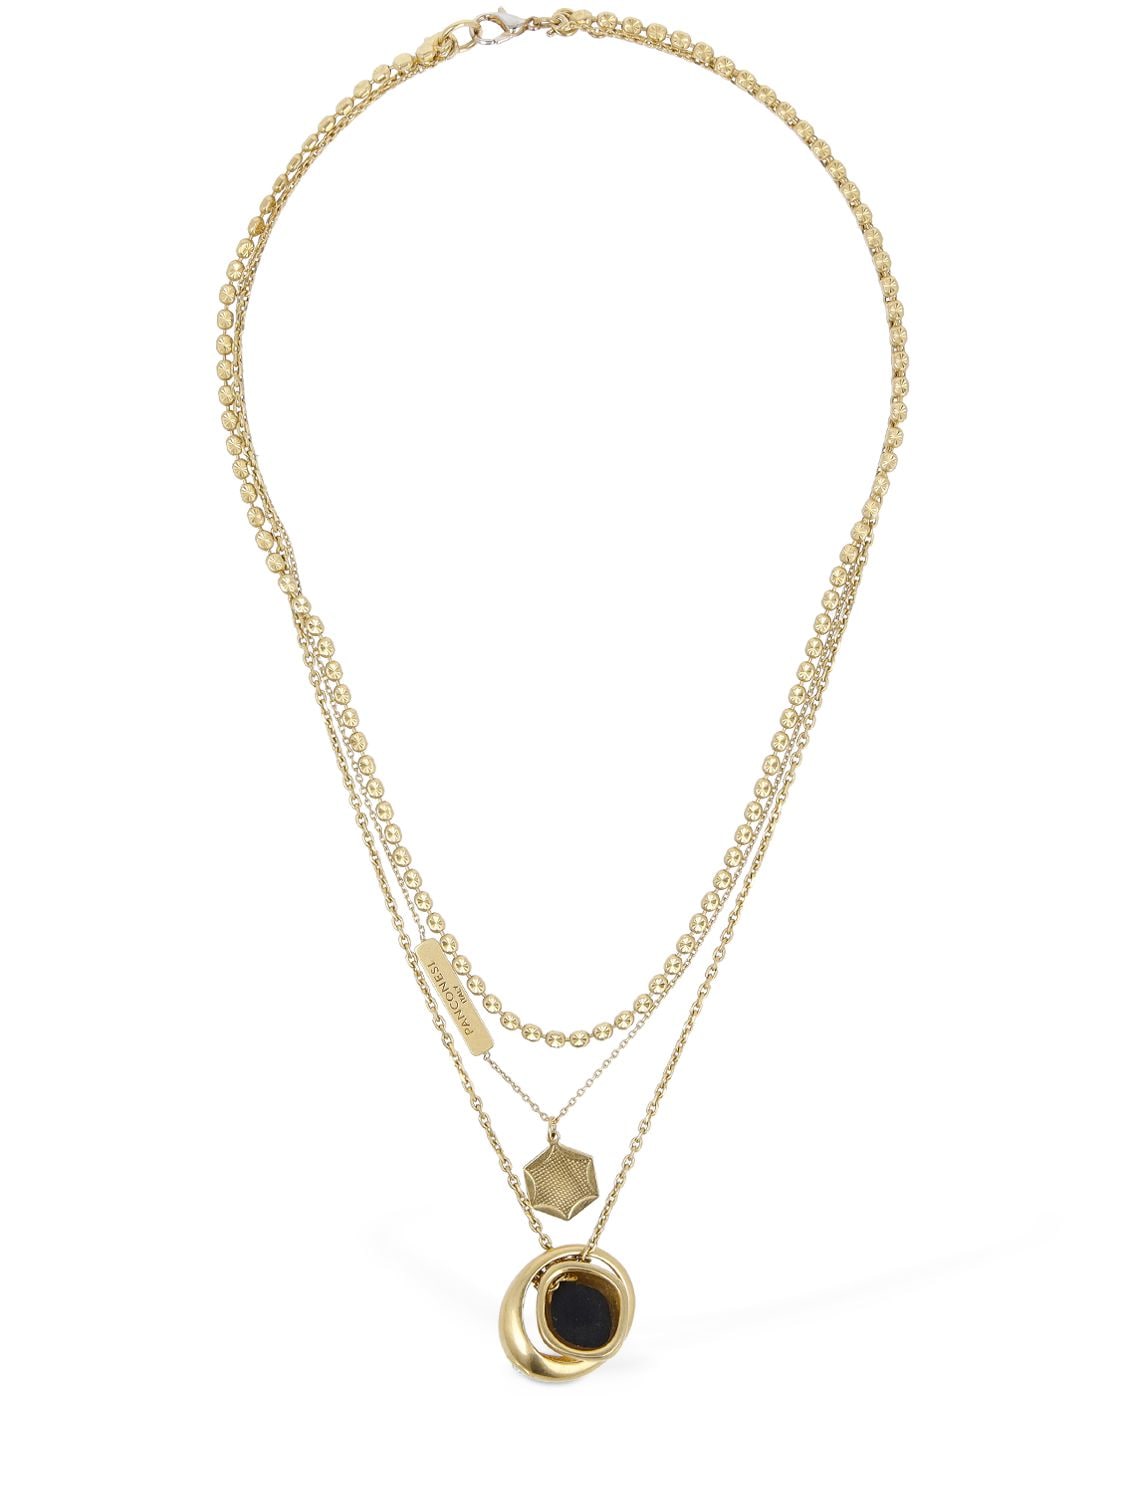 Famiglia Chevalier Necklace – WOMEN > JEWELRY & WATCHES > NECKLACES